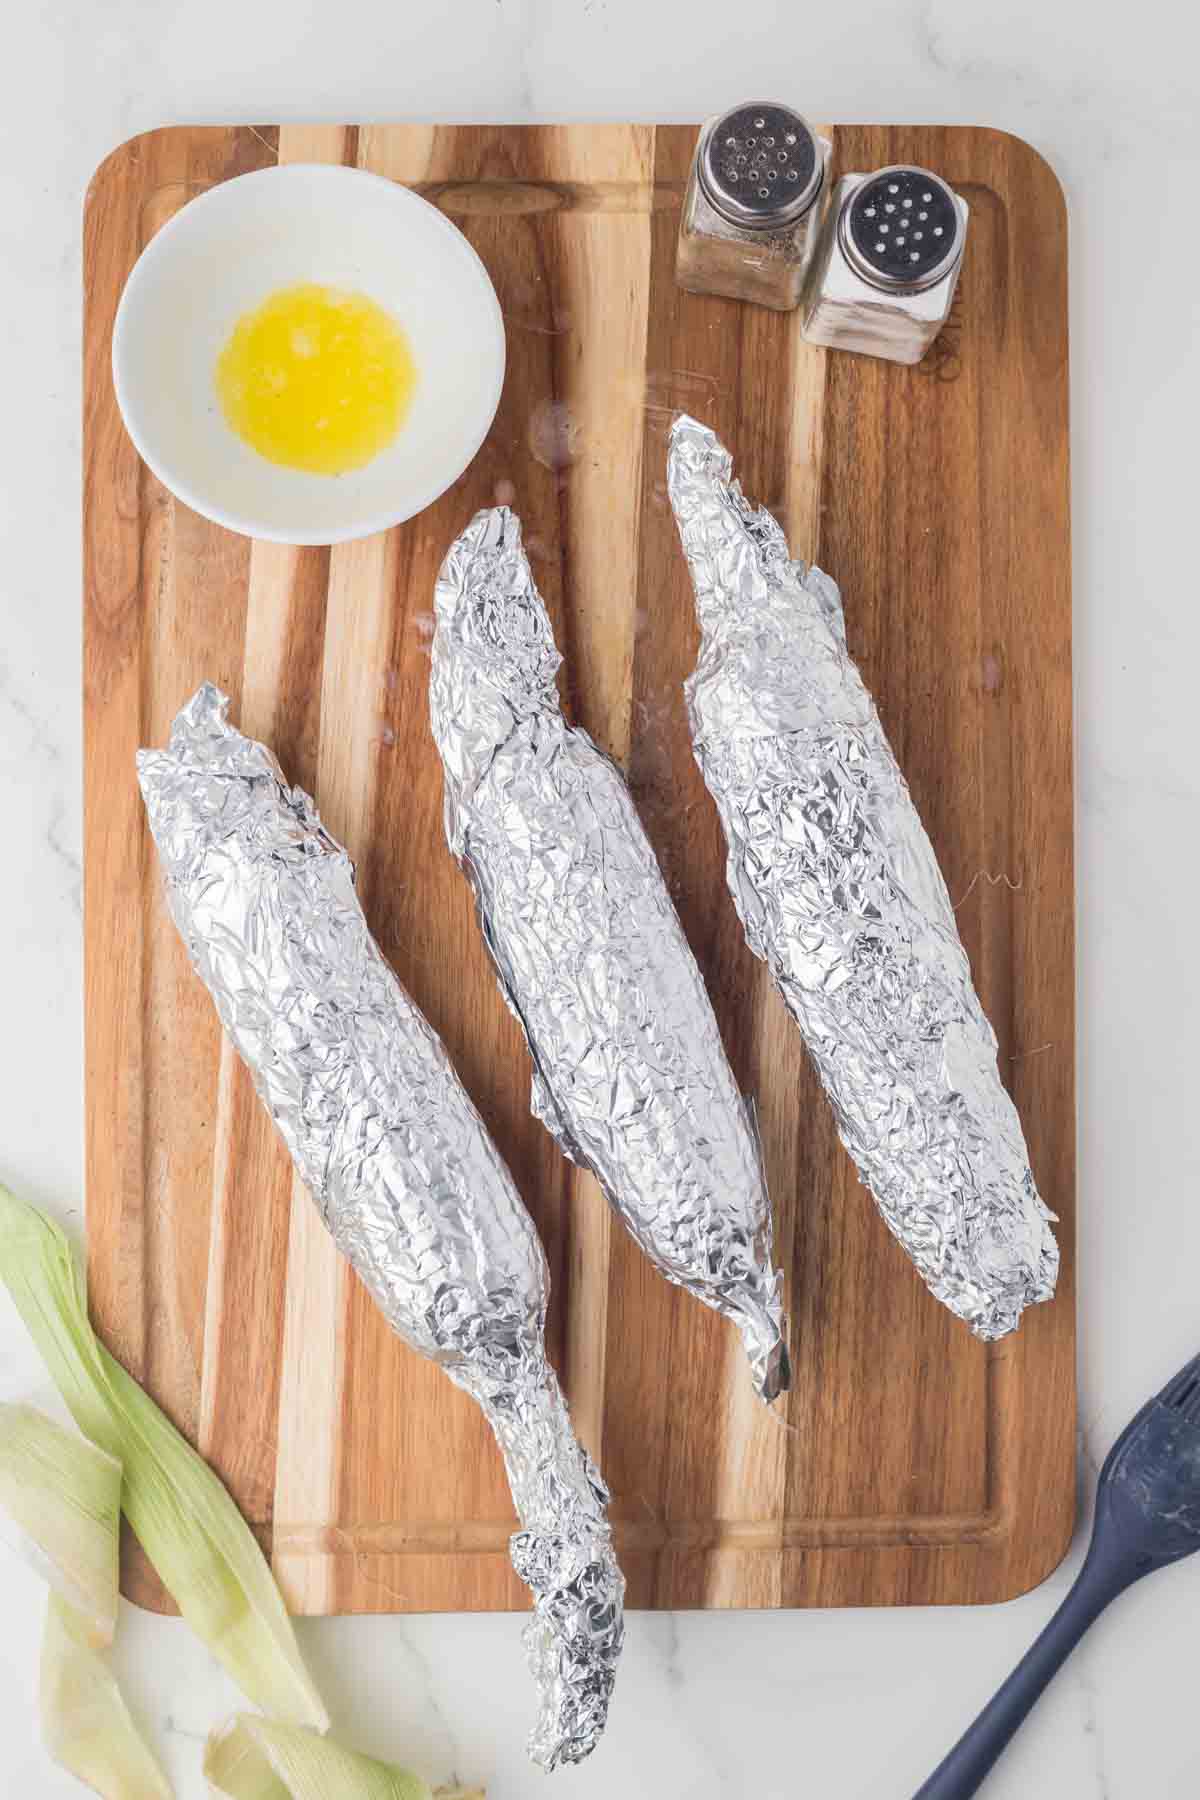 three pieces of corn on the cob wrapped in foil laying on a wooden board